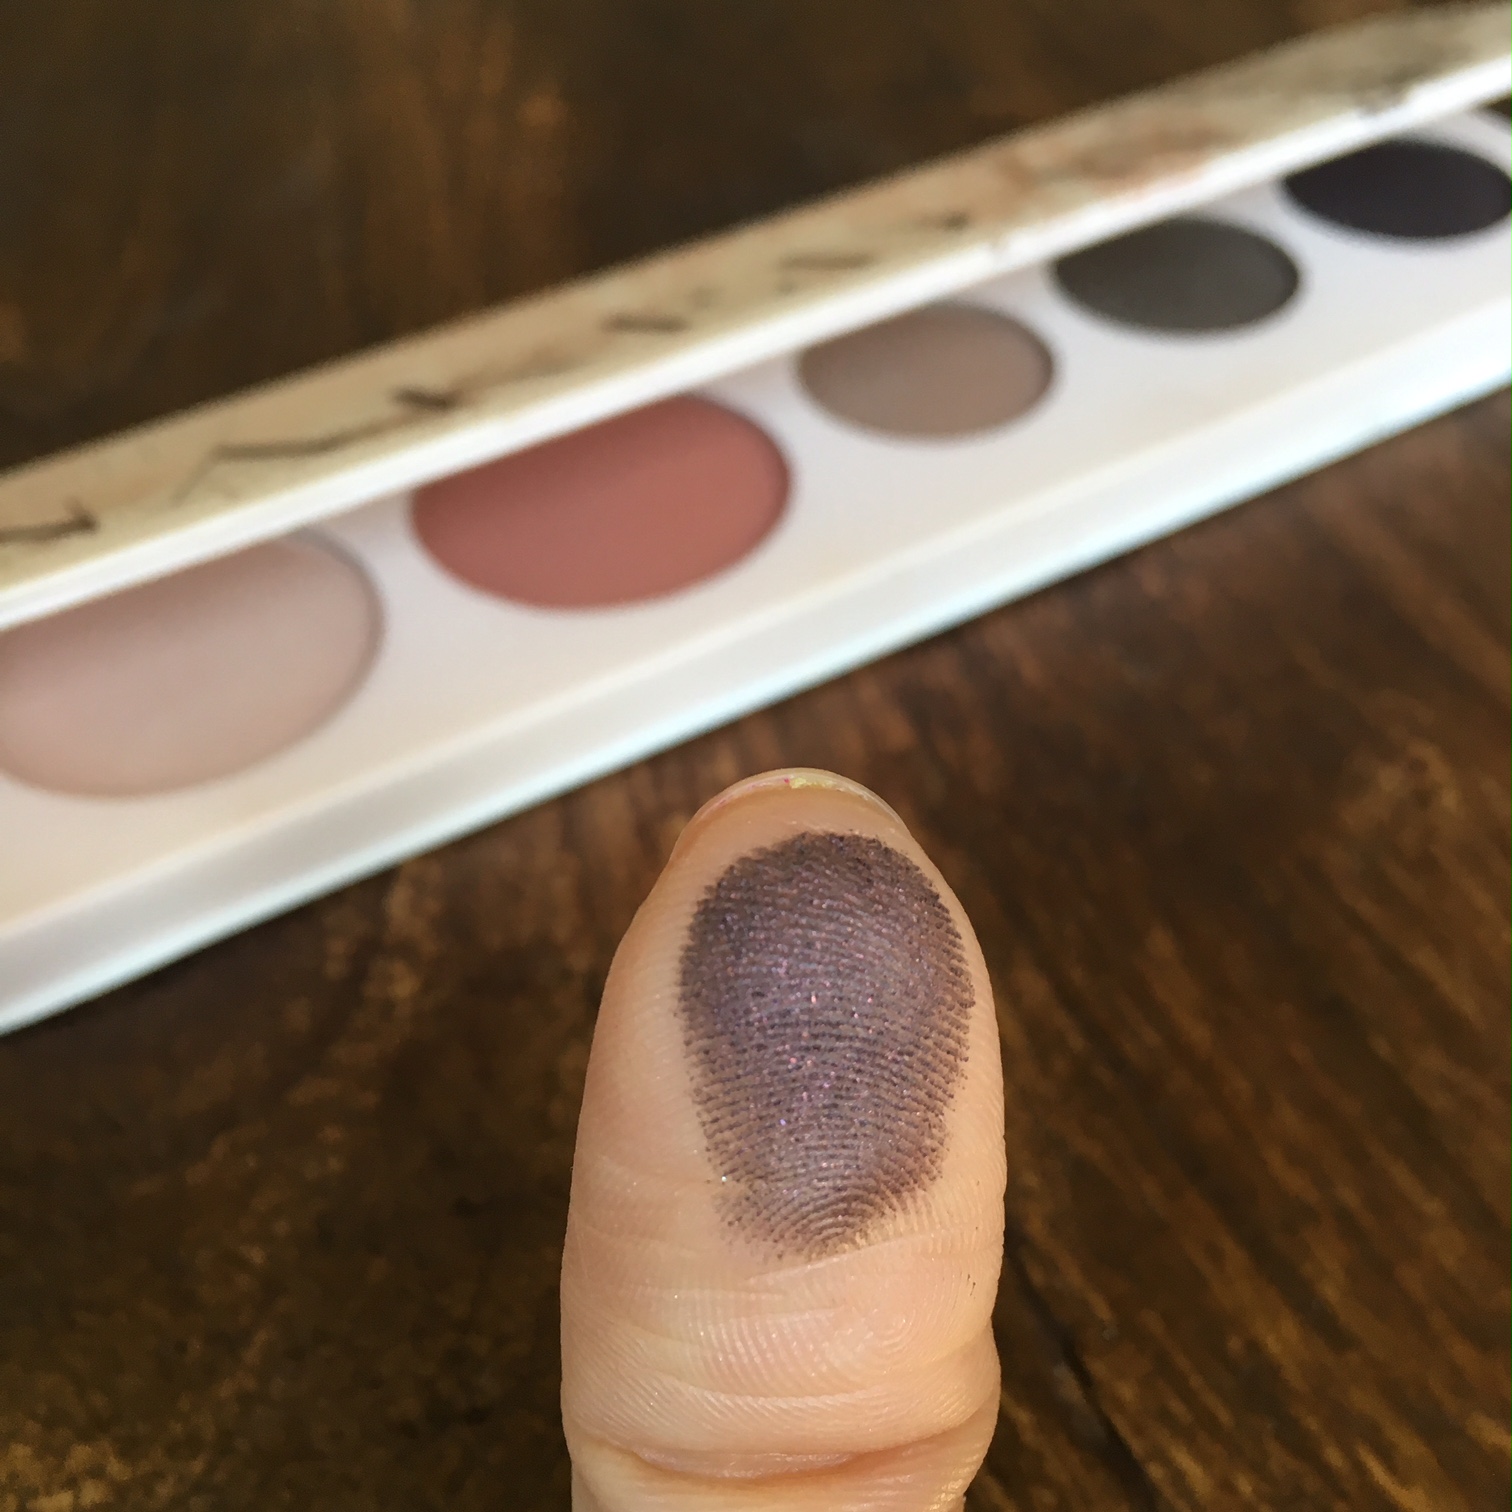 100 Percent Pure Naked II swatches